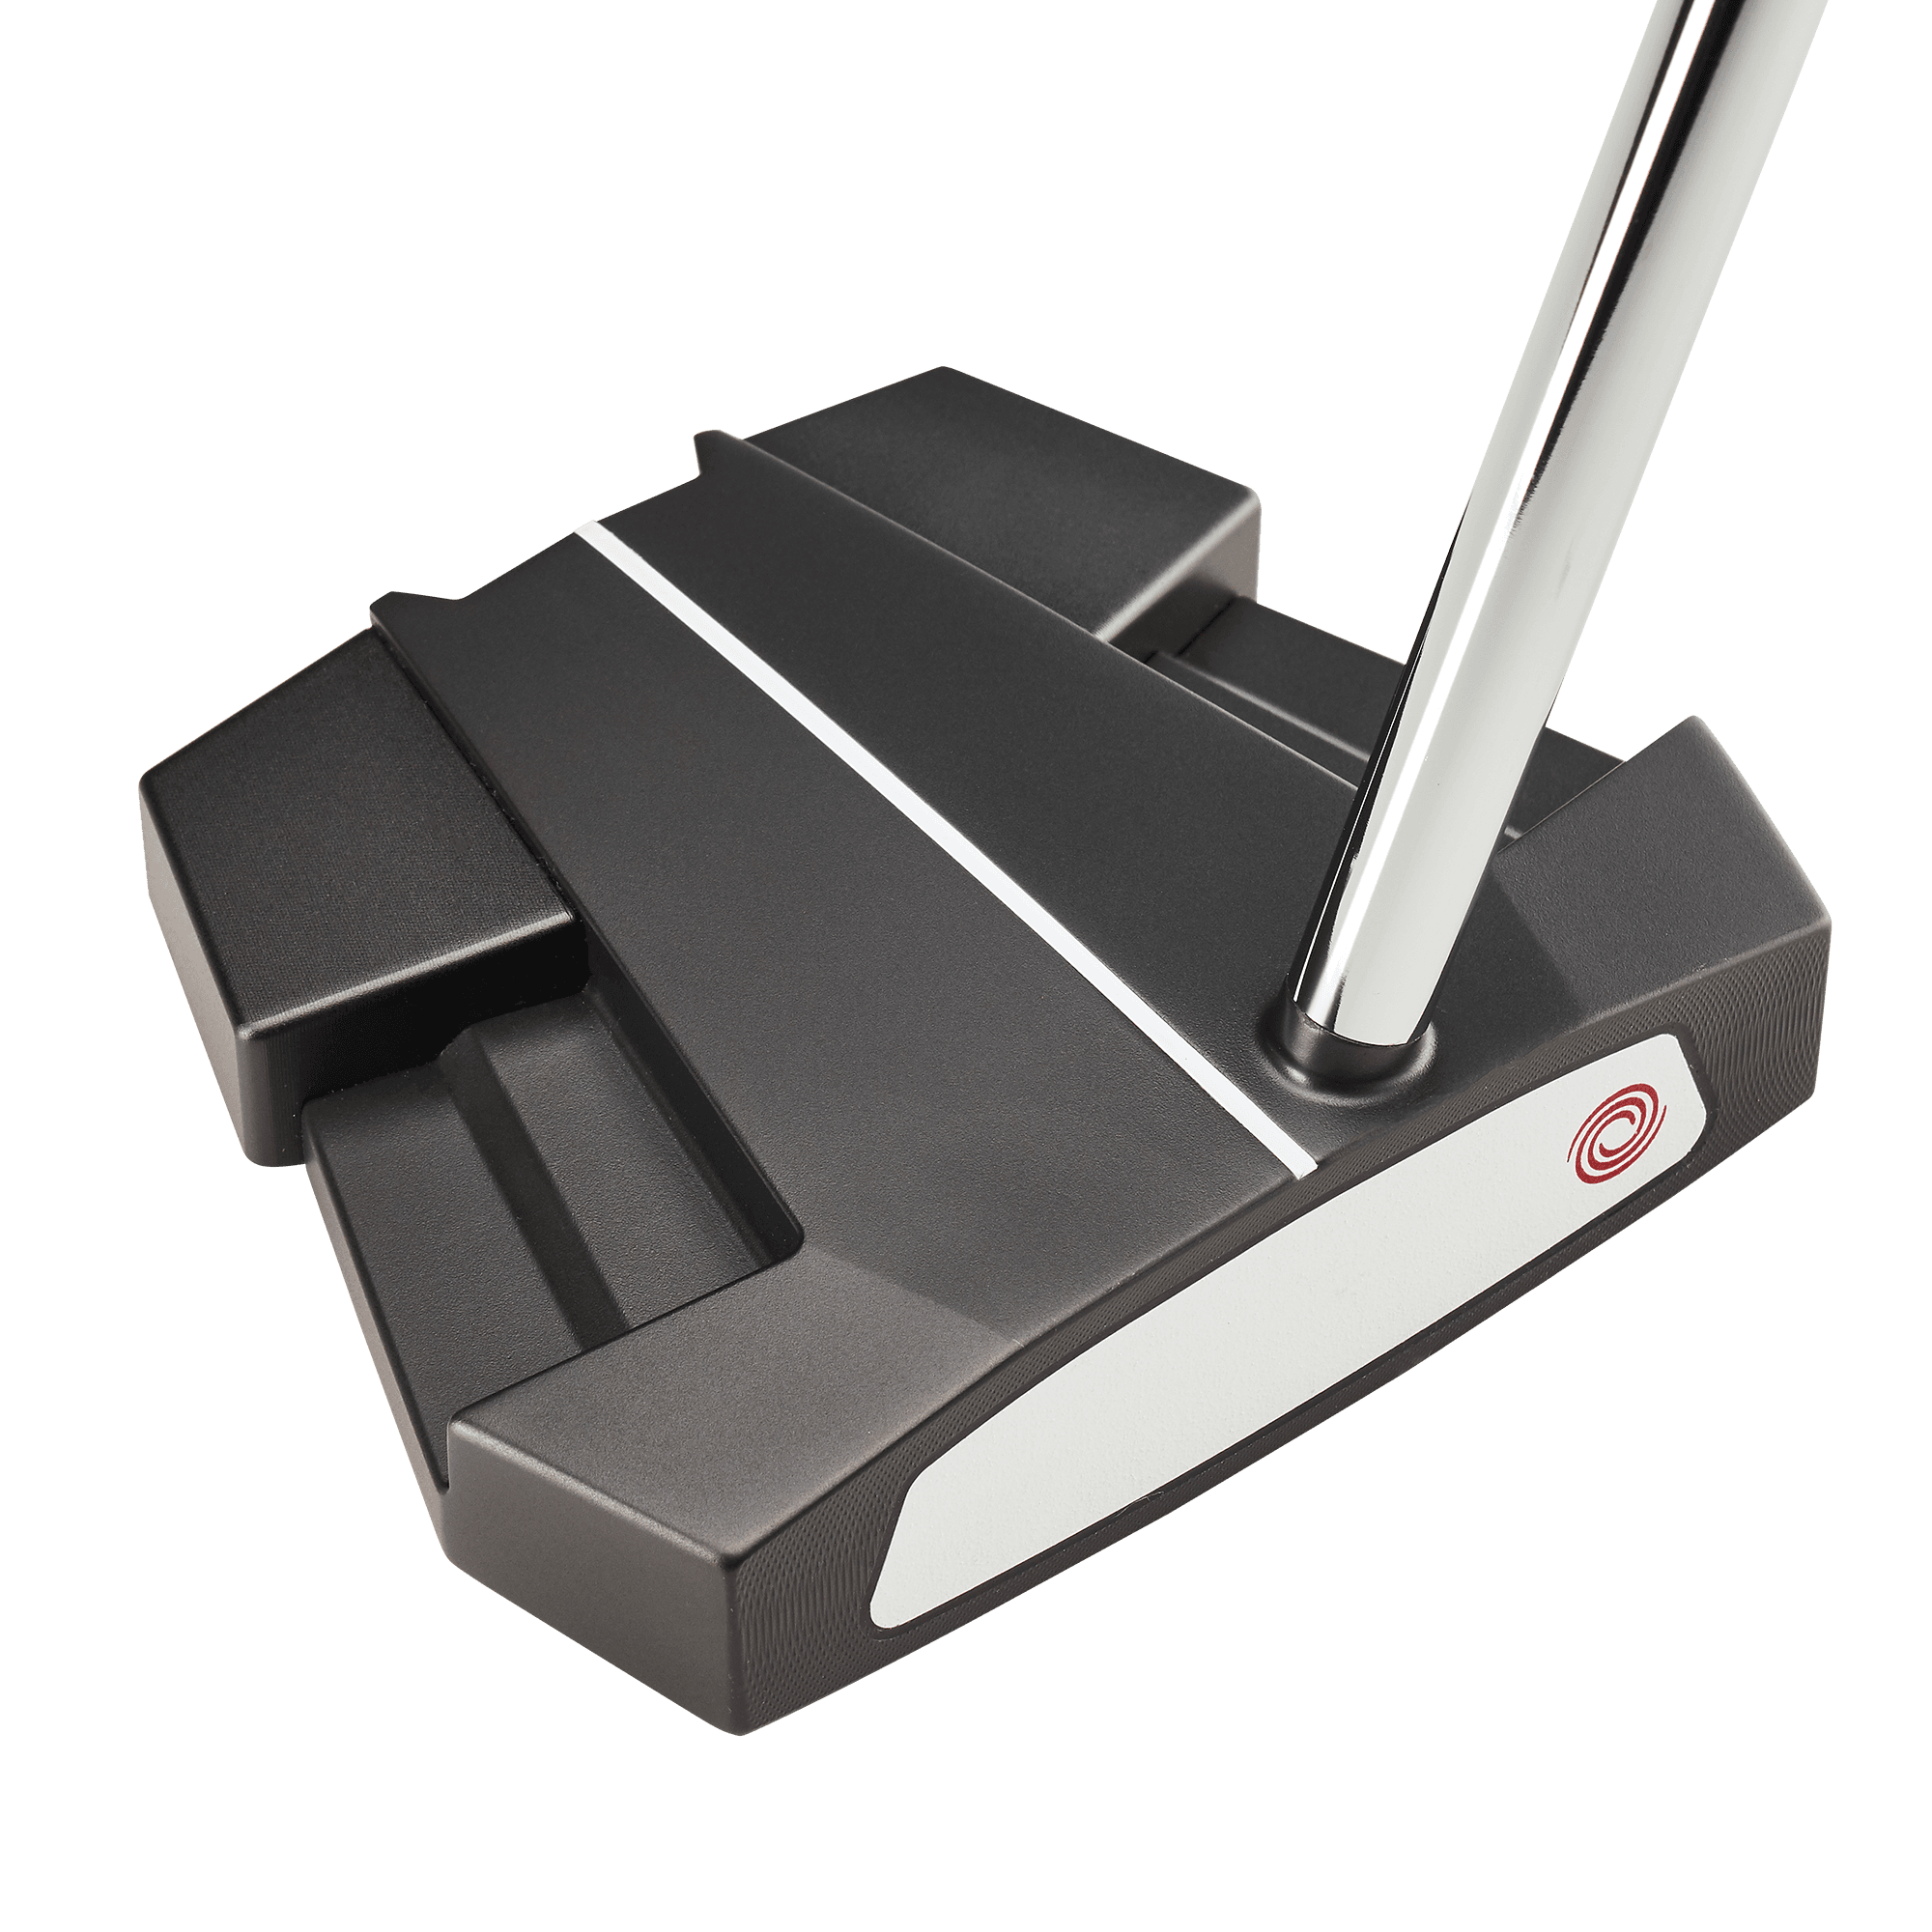 Odyssey Eleven Tour Lined CS Putter | Callaway Golf Pre-Owned